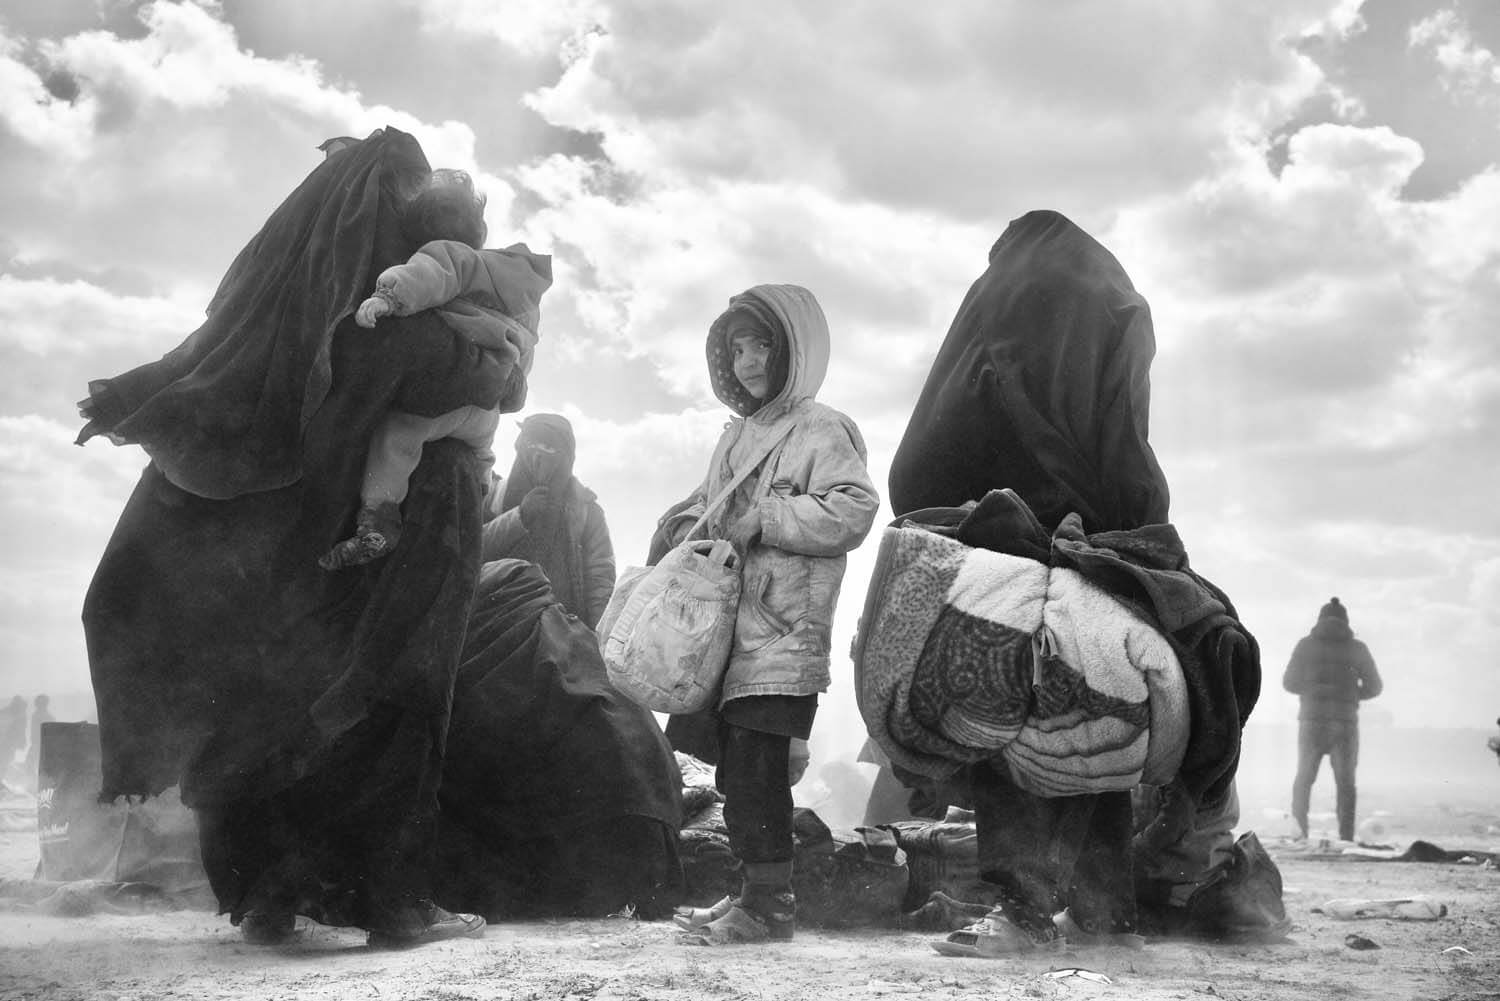 Young Syrian girl standing between women holding luggage